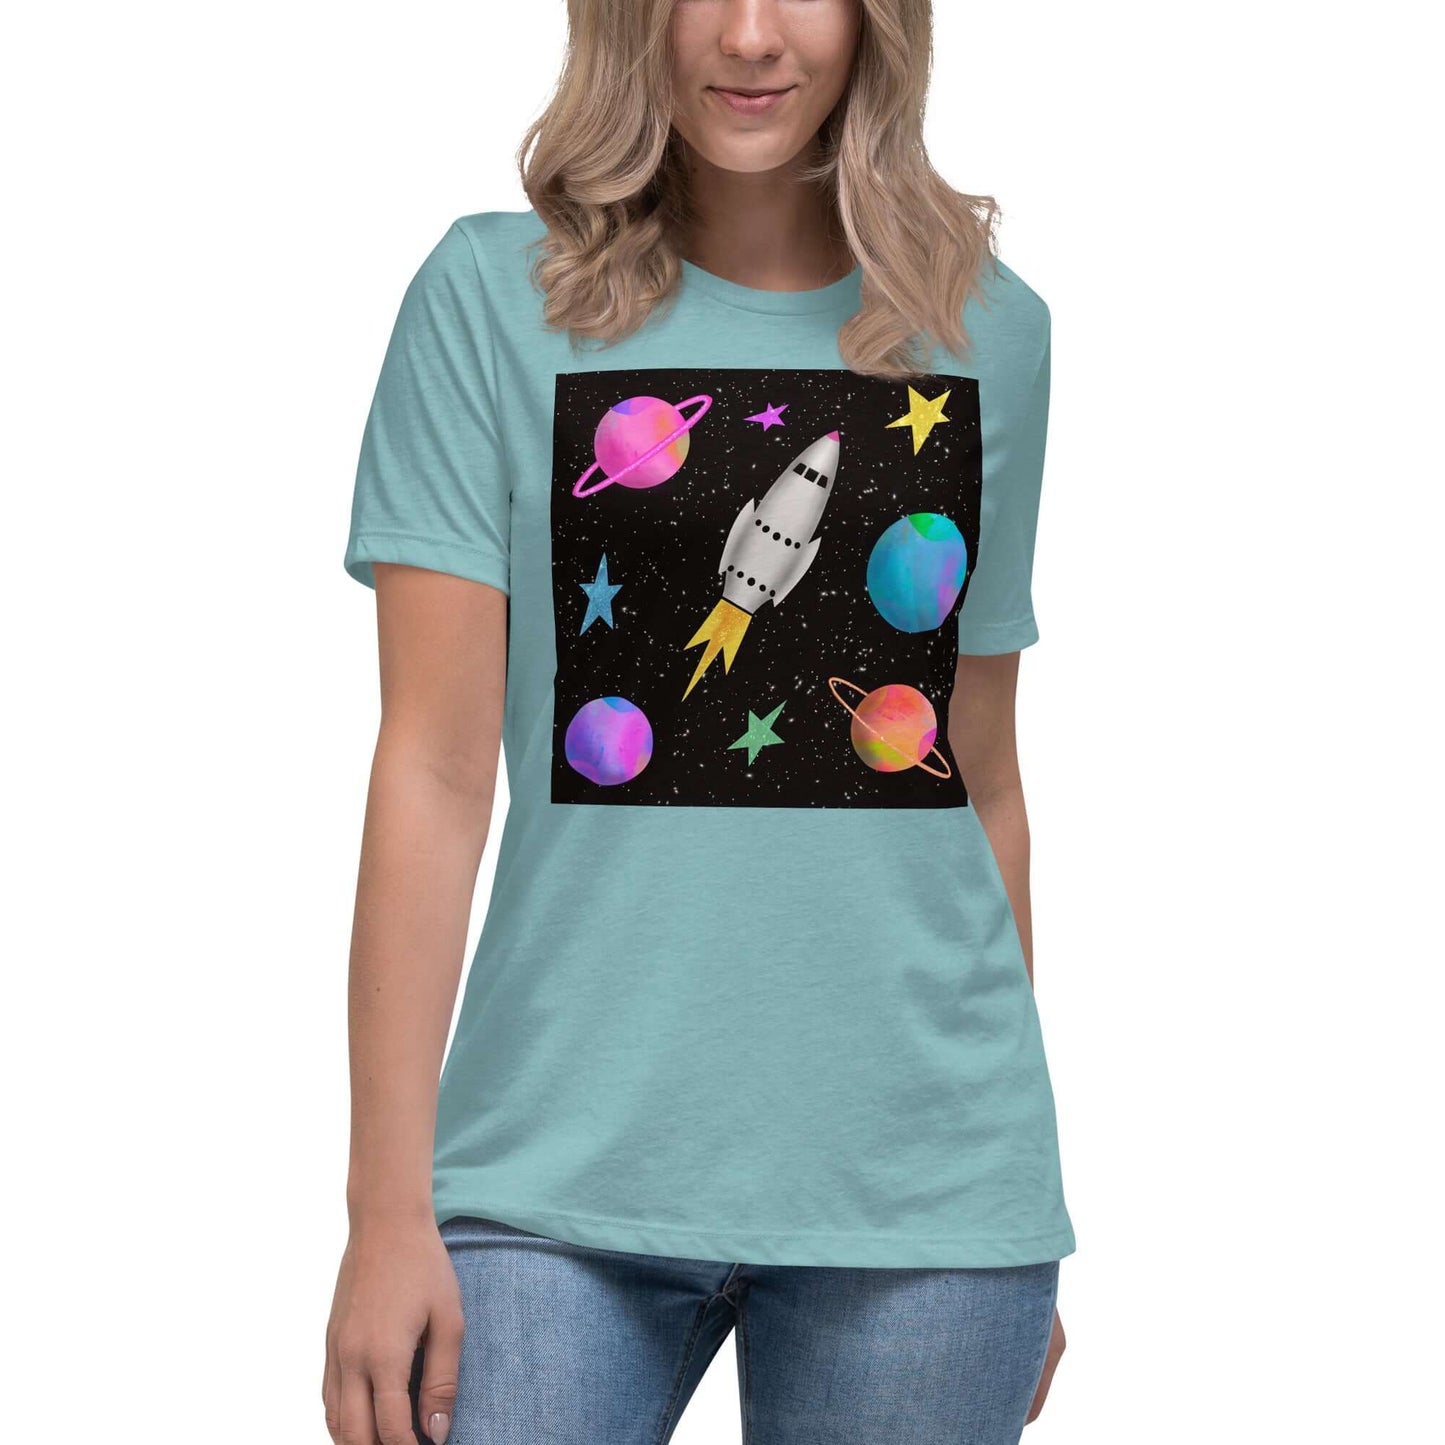 Rocket with Colorful Stars and Planets “Space Rockets” Women’s Short Sleeve Tee in Heather Blue Lagoon